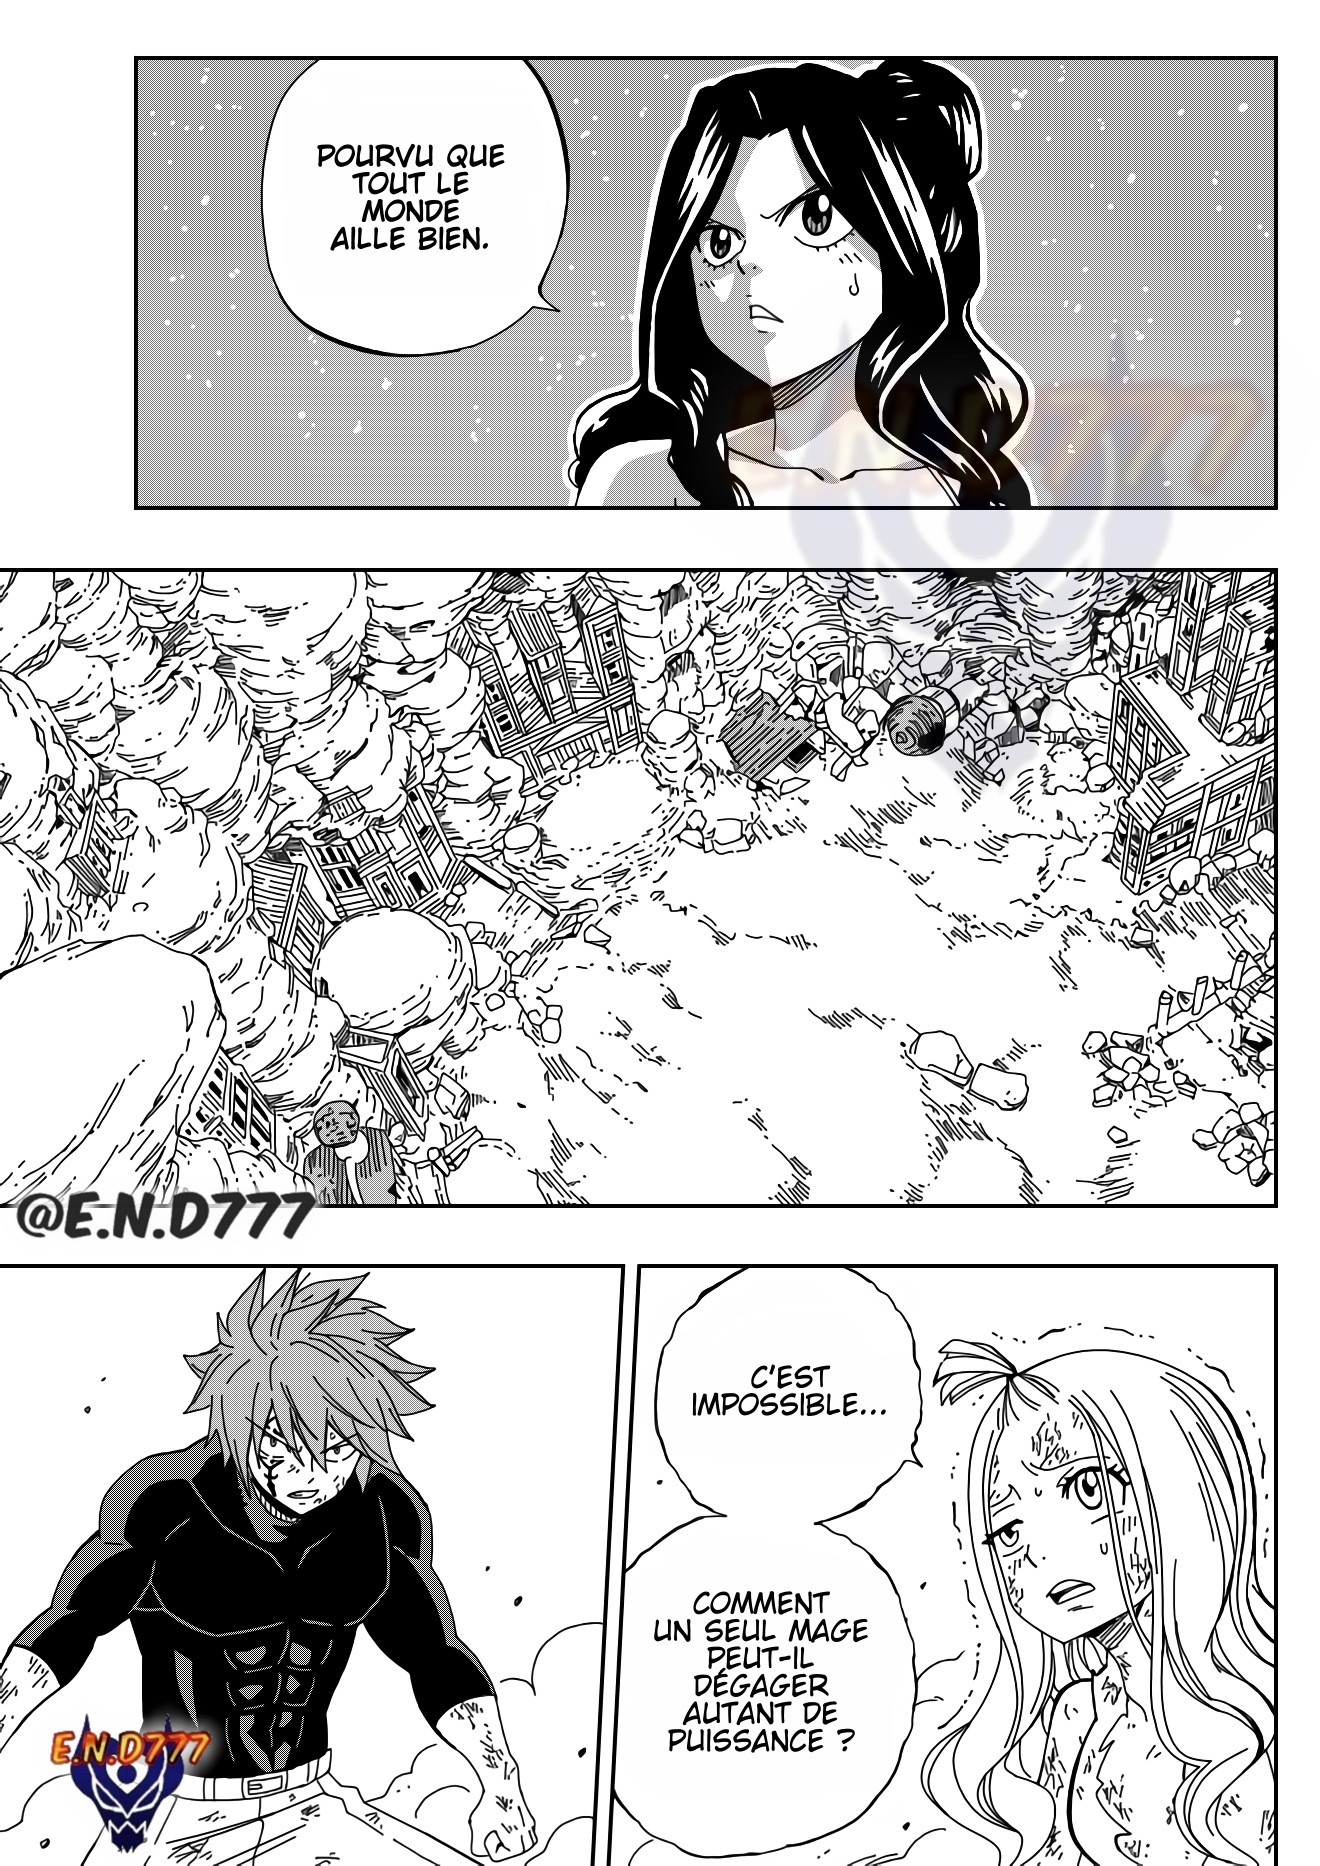 Fairy Tail Fan Manga Page 15 By End7777 On Deviantart